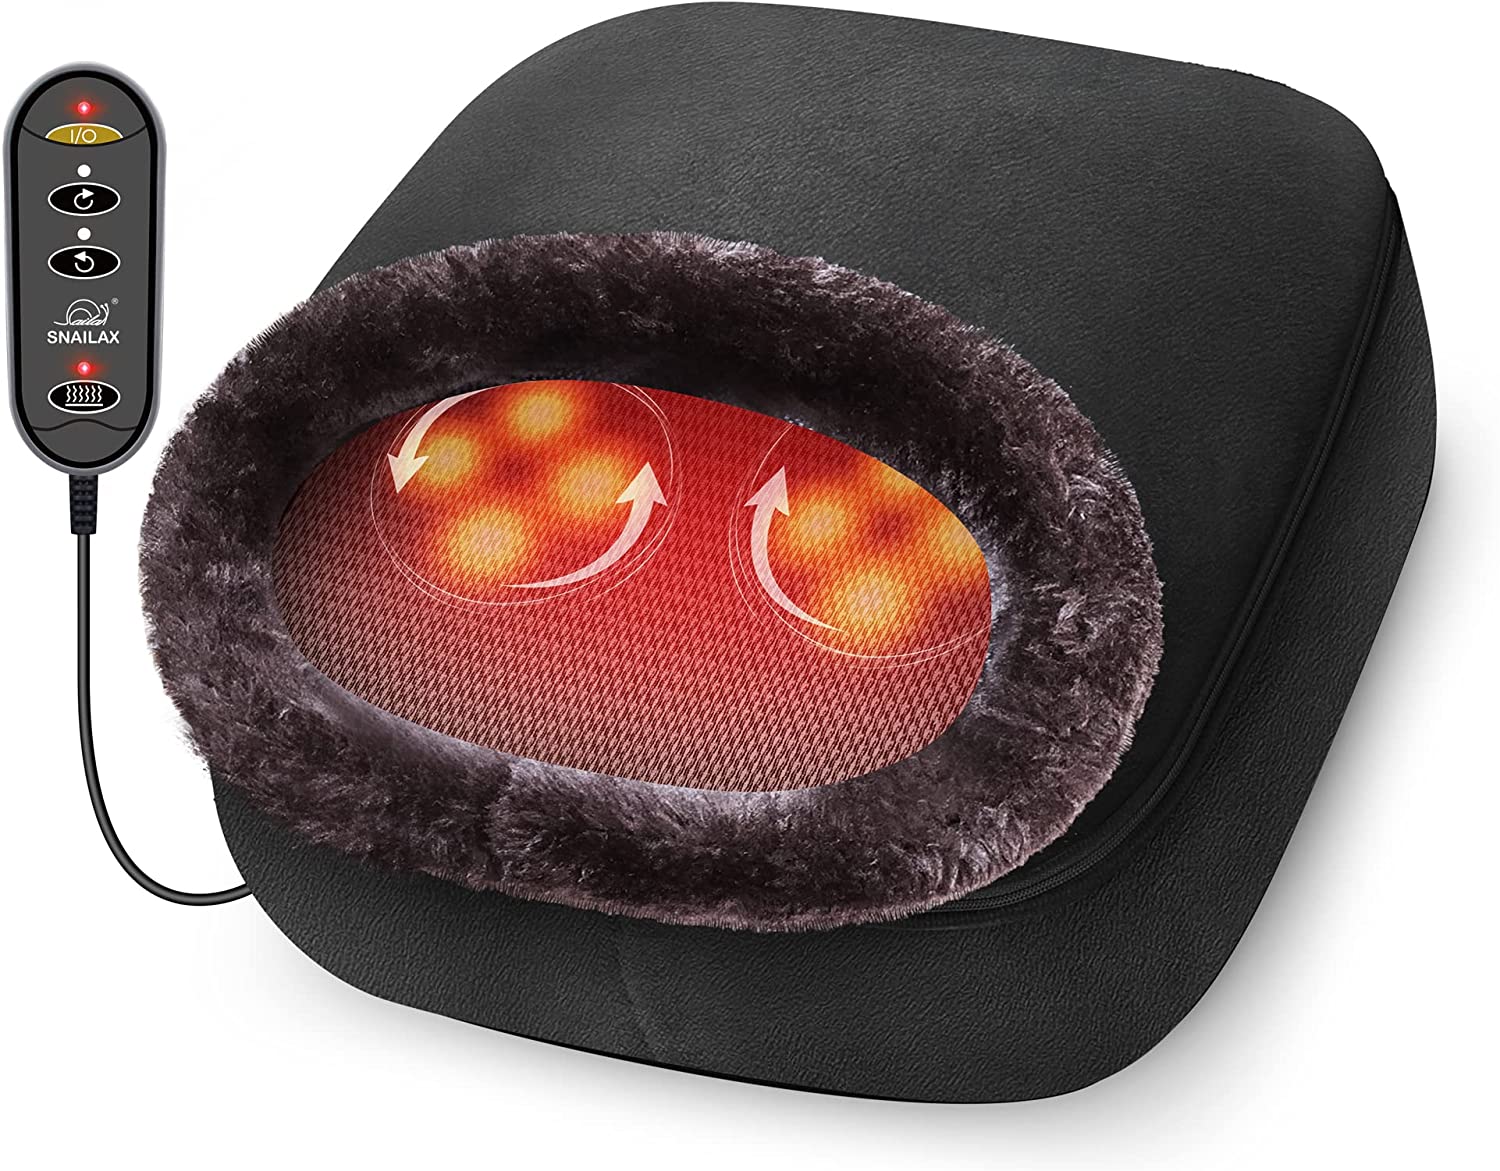 Snailax 2 in 1 Shiatsu Foot and Back Massager